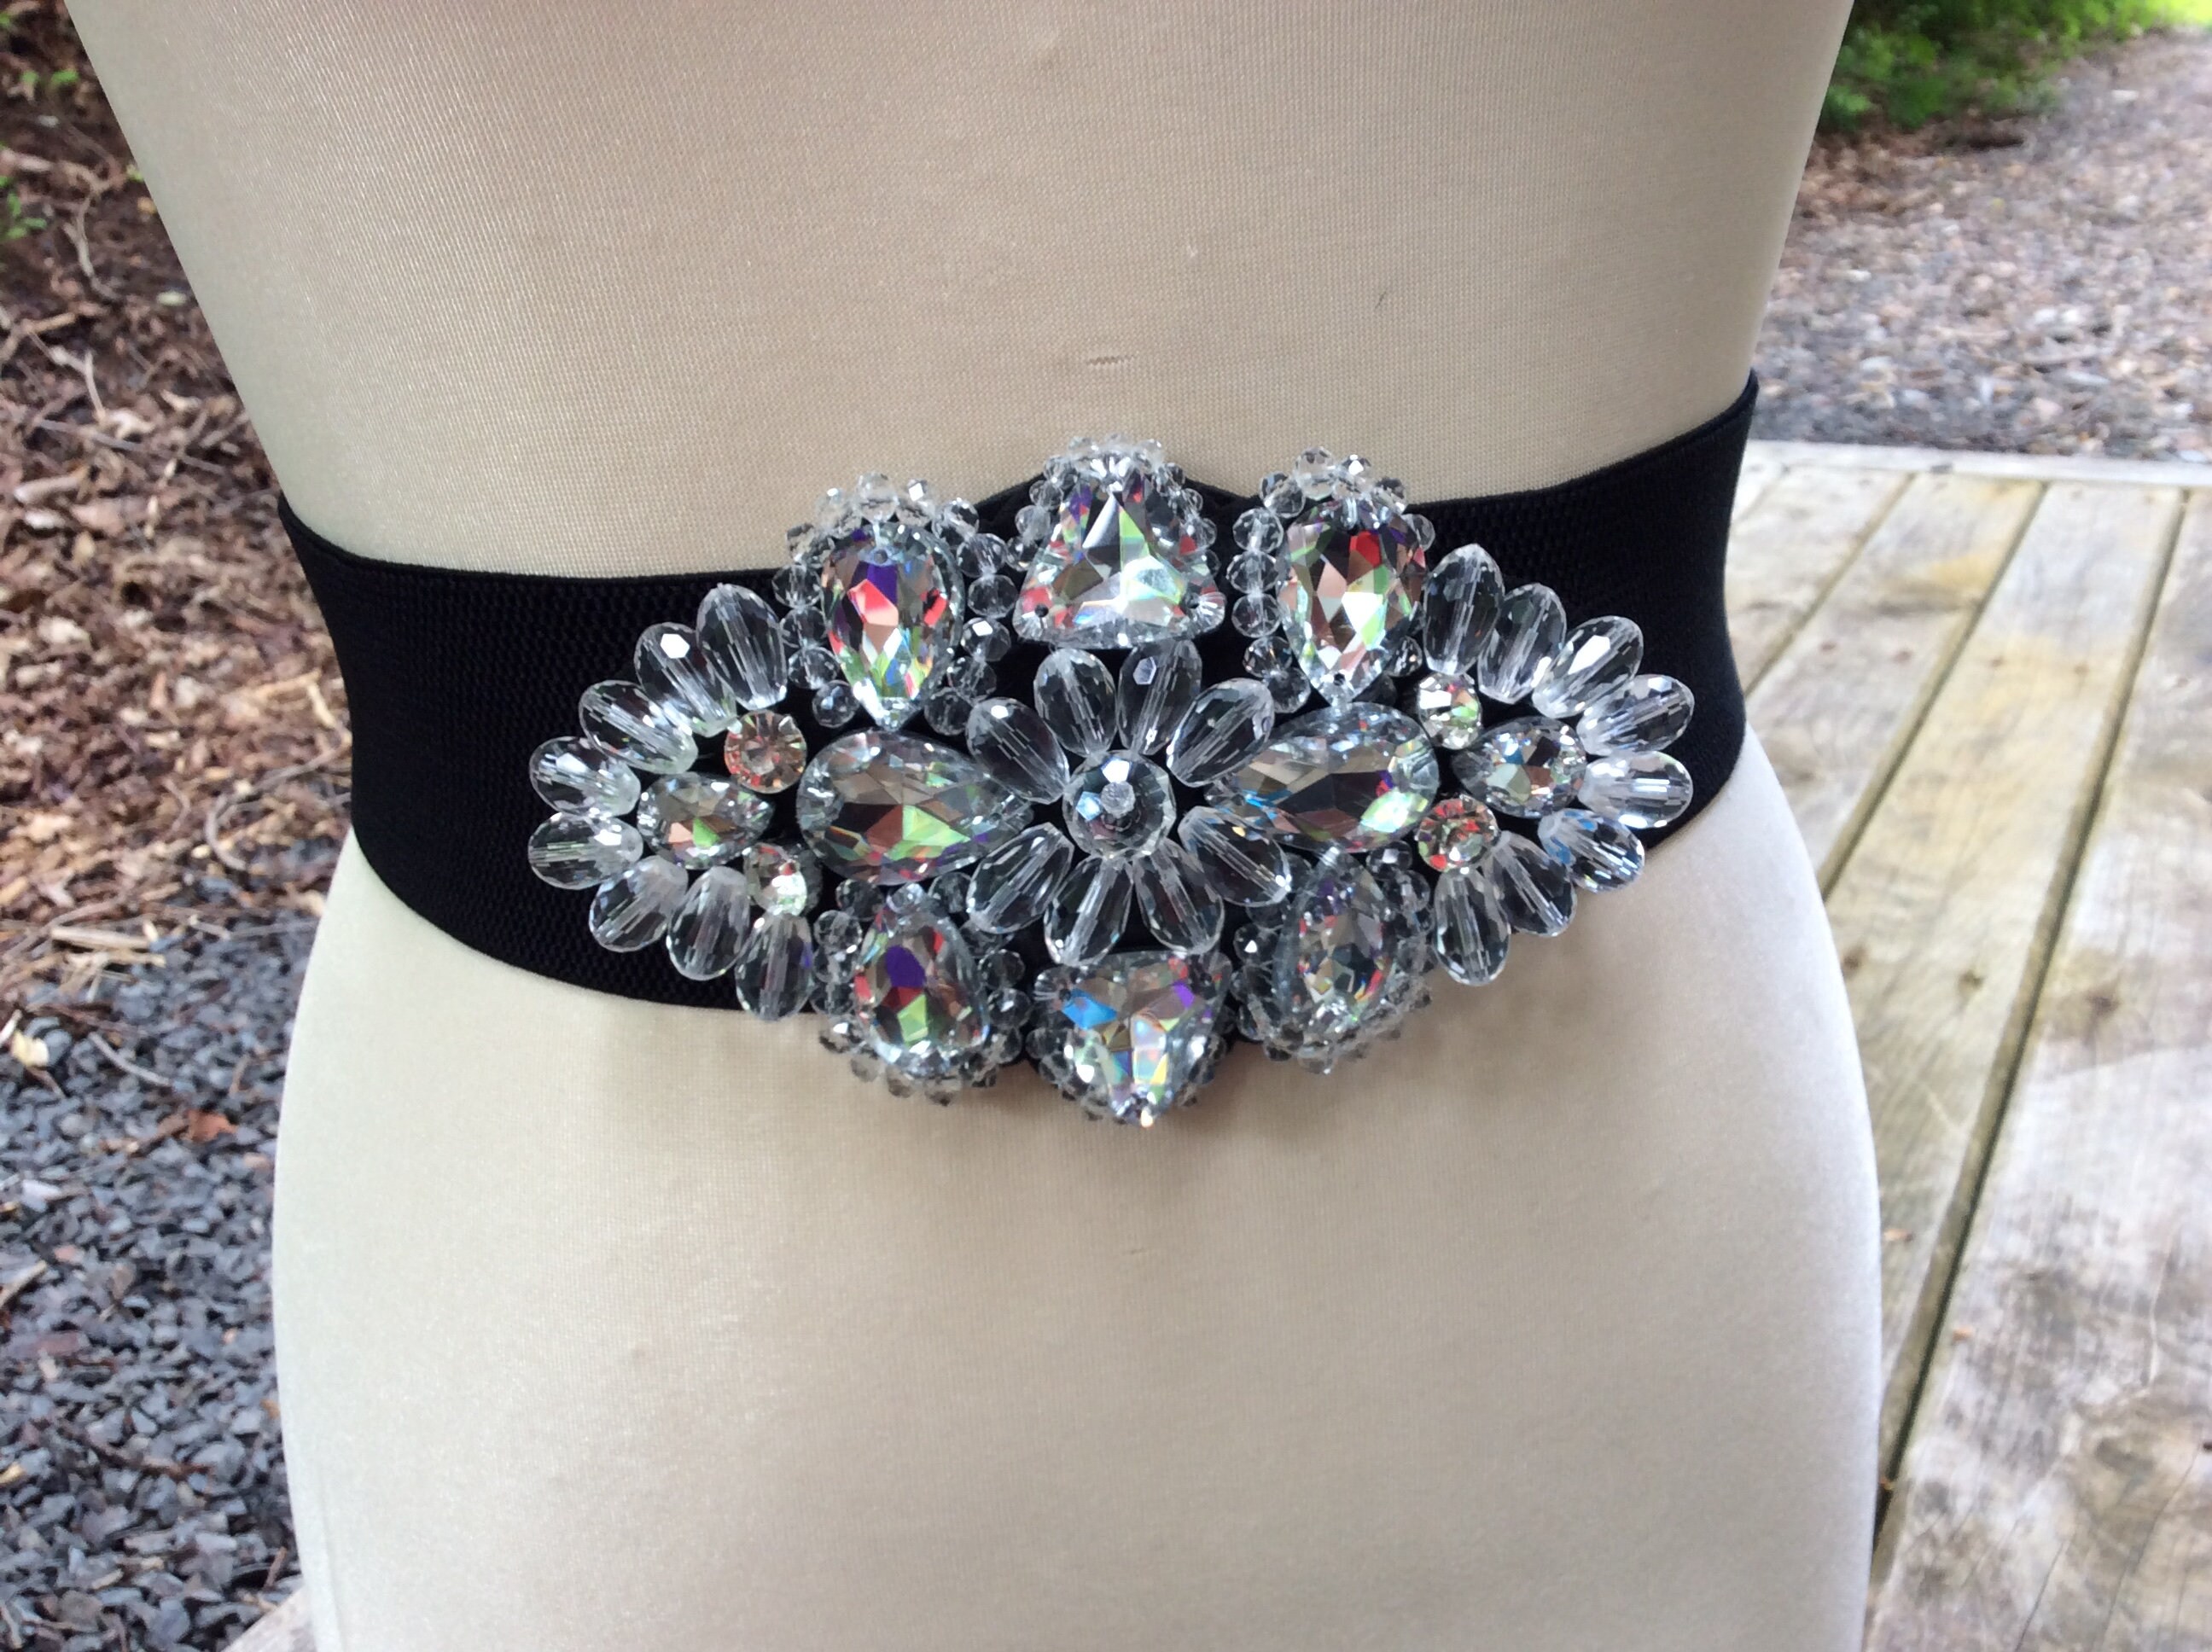 Small Scarf Buckles, Shiny Rhinestones Scarf Buckle, Scarf Clasp Clips,  Clothing Ring Wrap Holder 